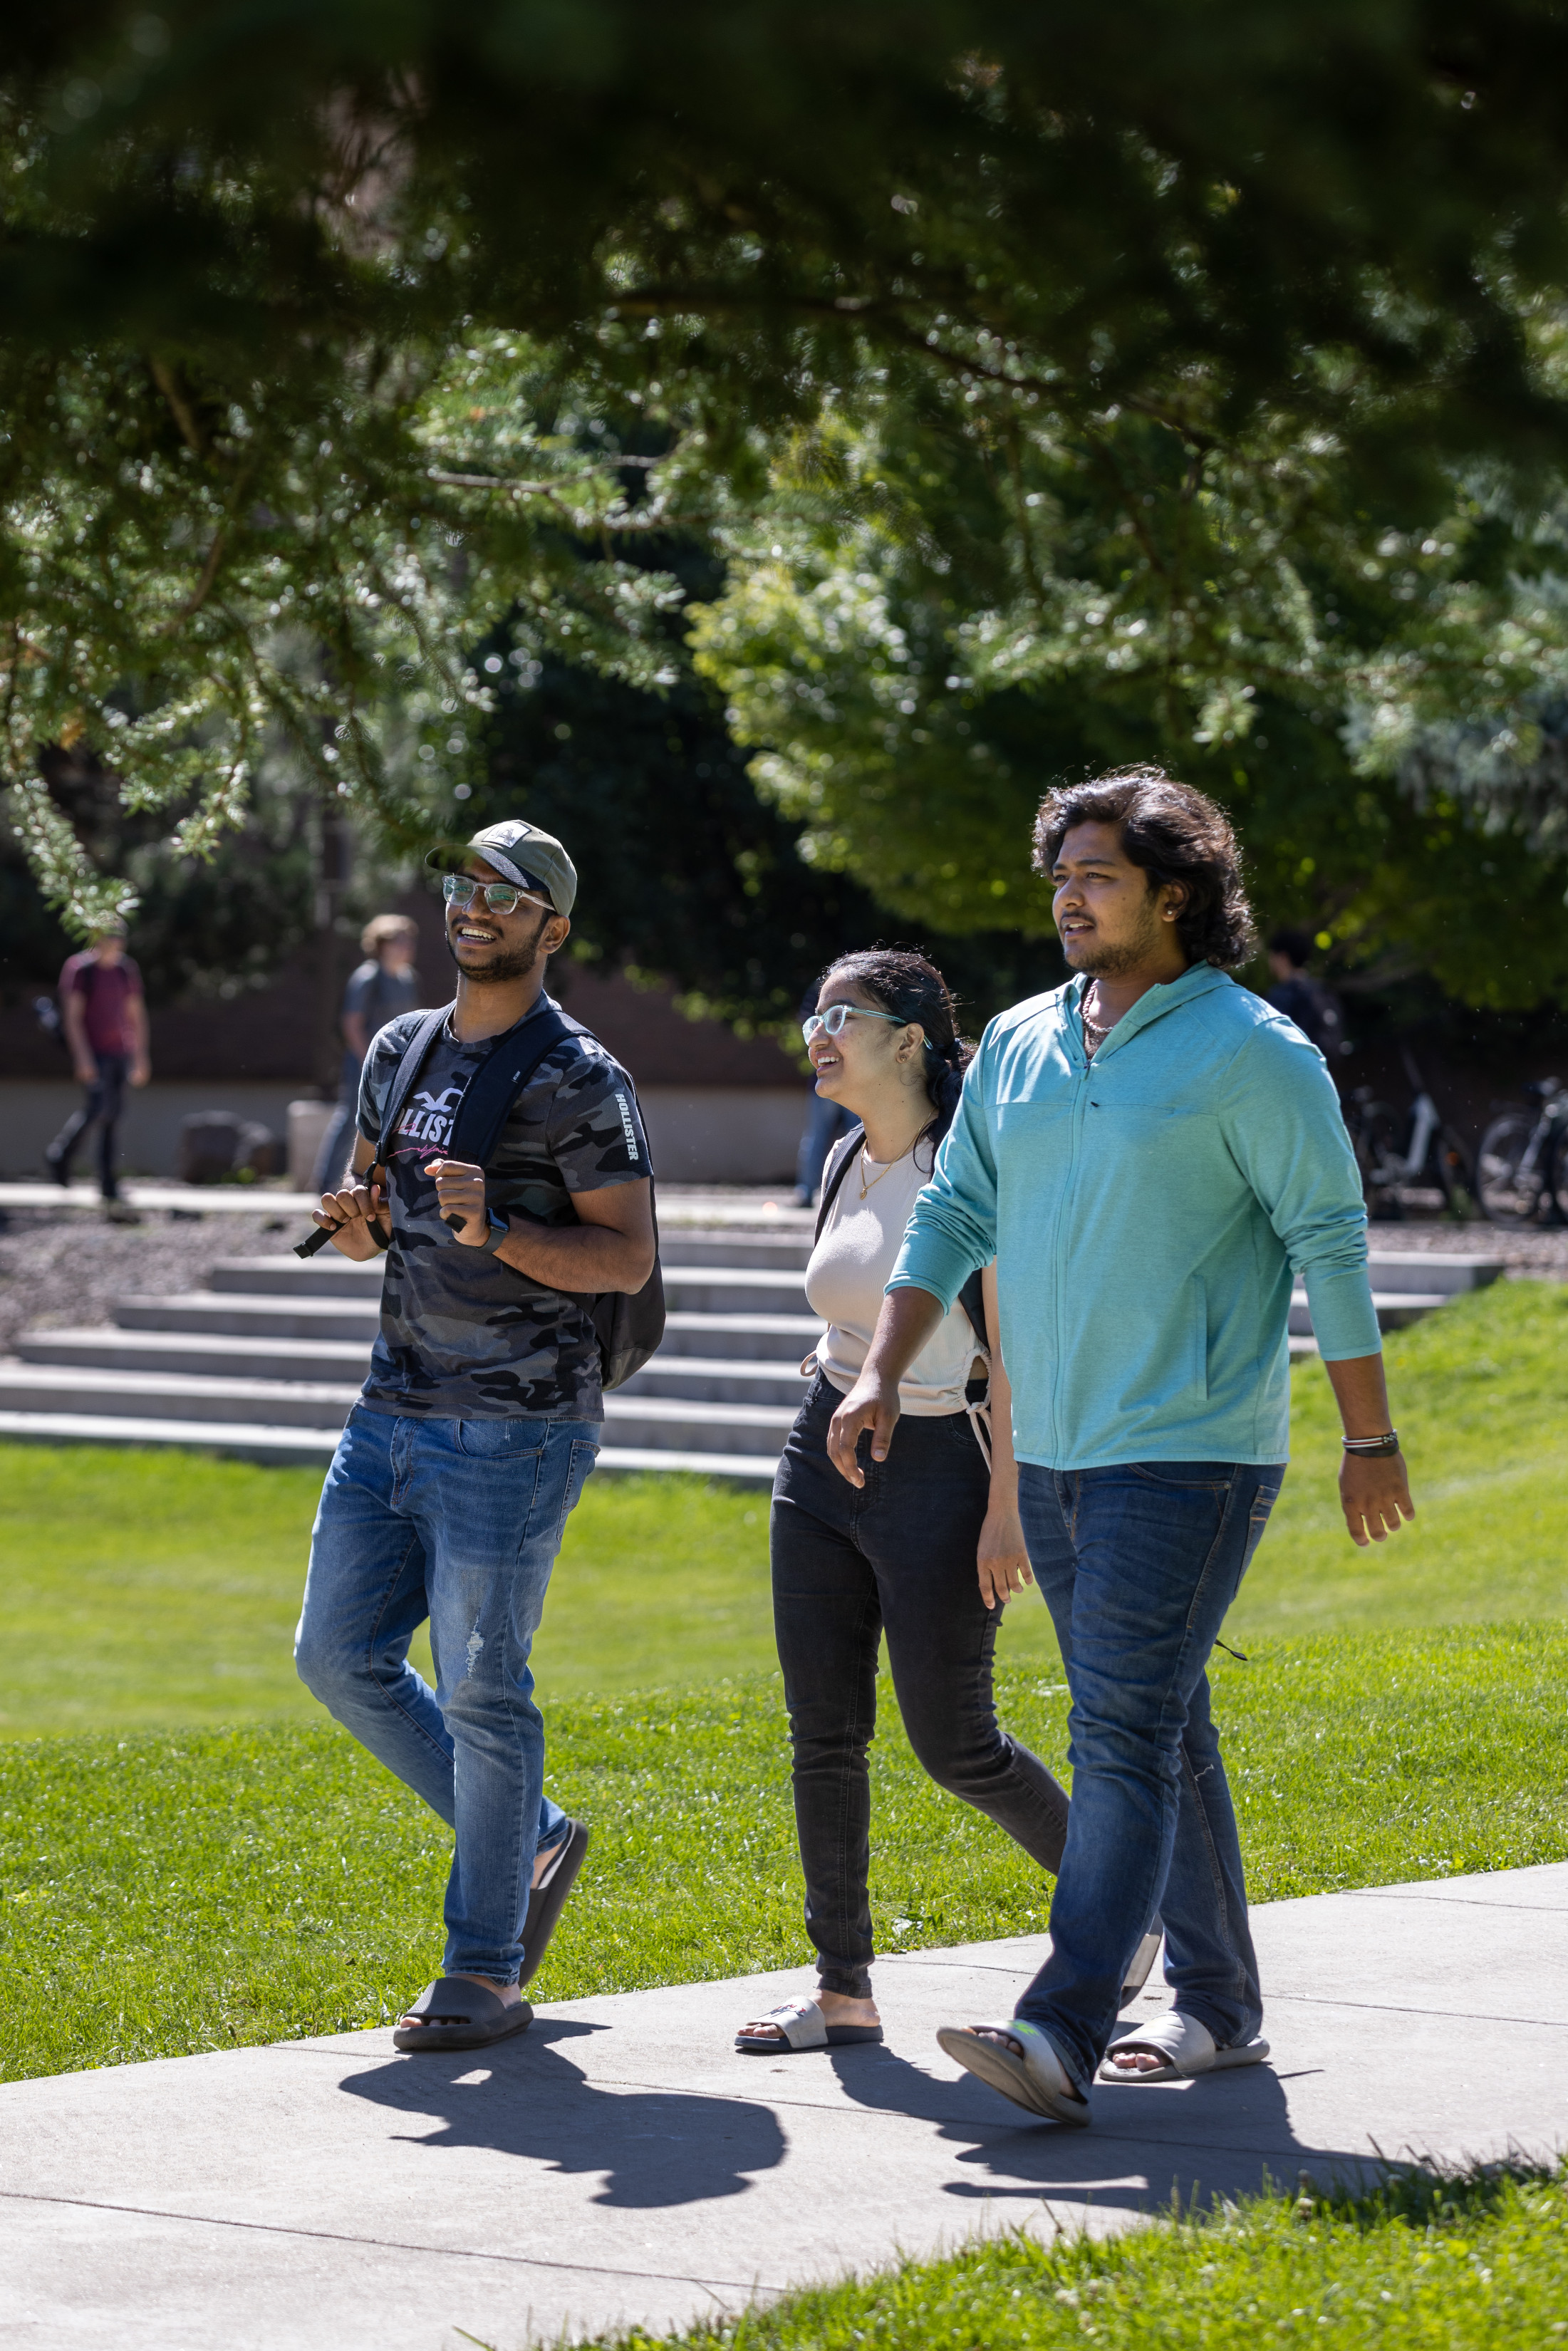 Students smiling being candid on campus.